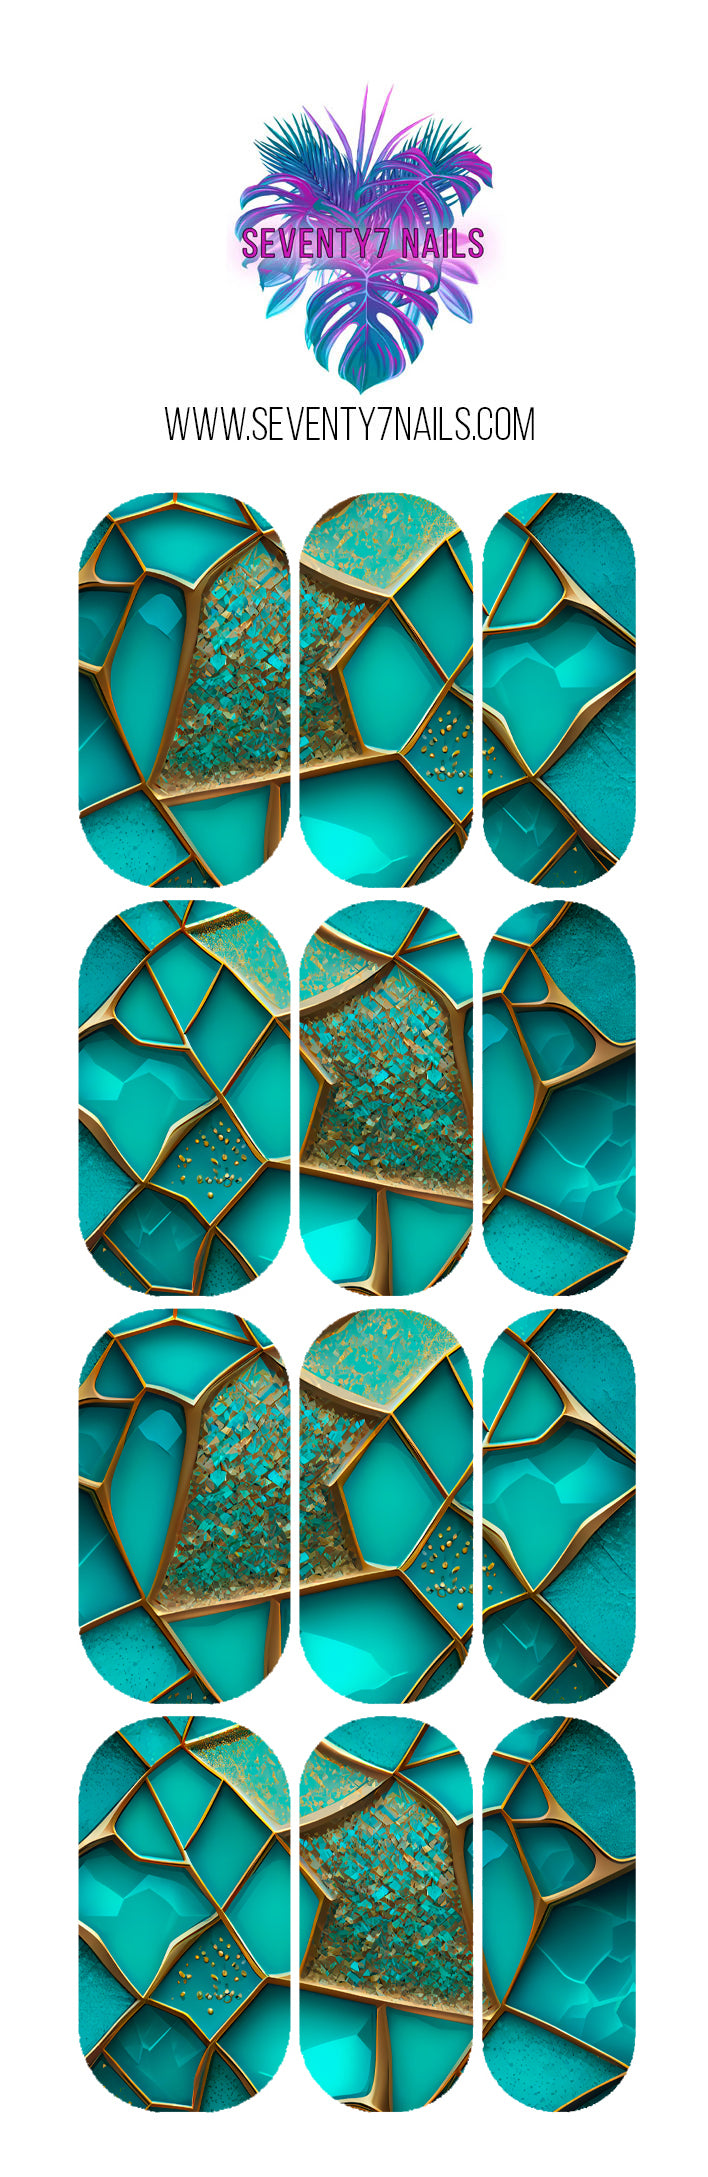 Waterslide Nail Decals - Cracked Turquoise